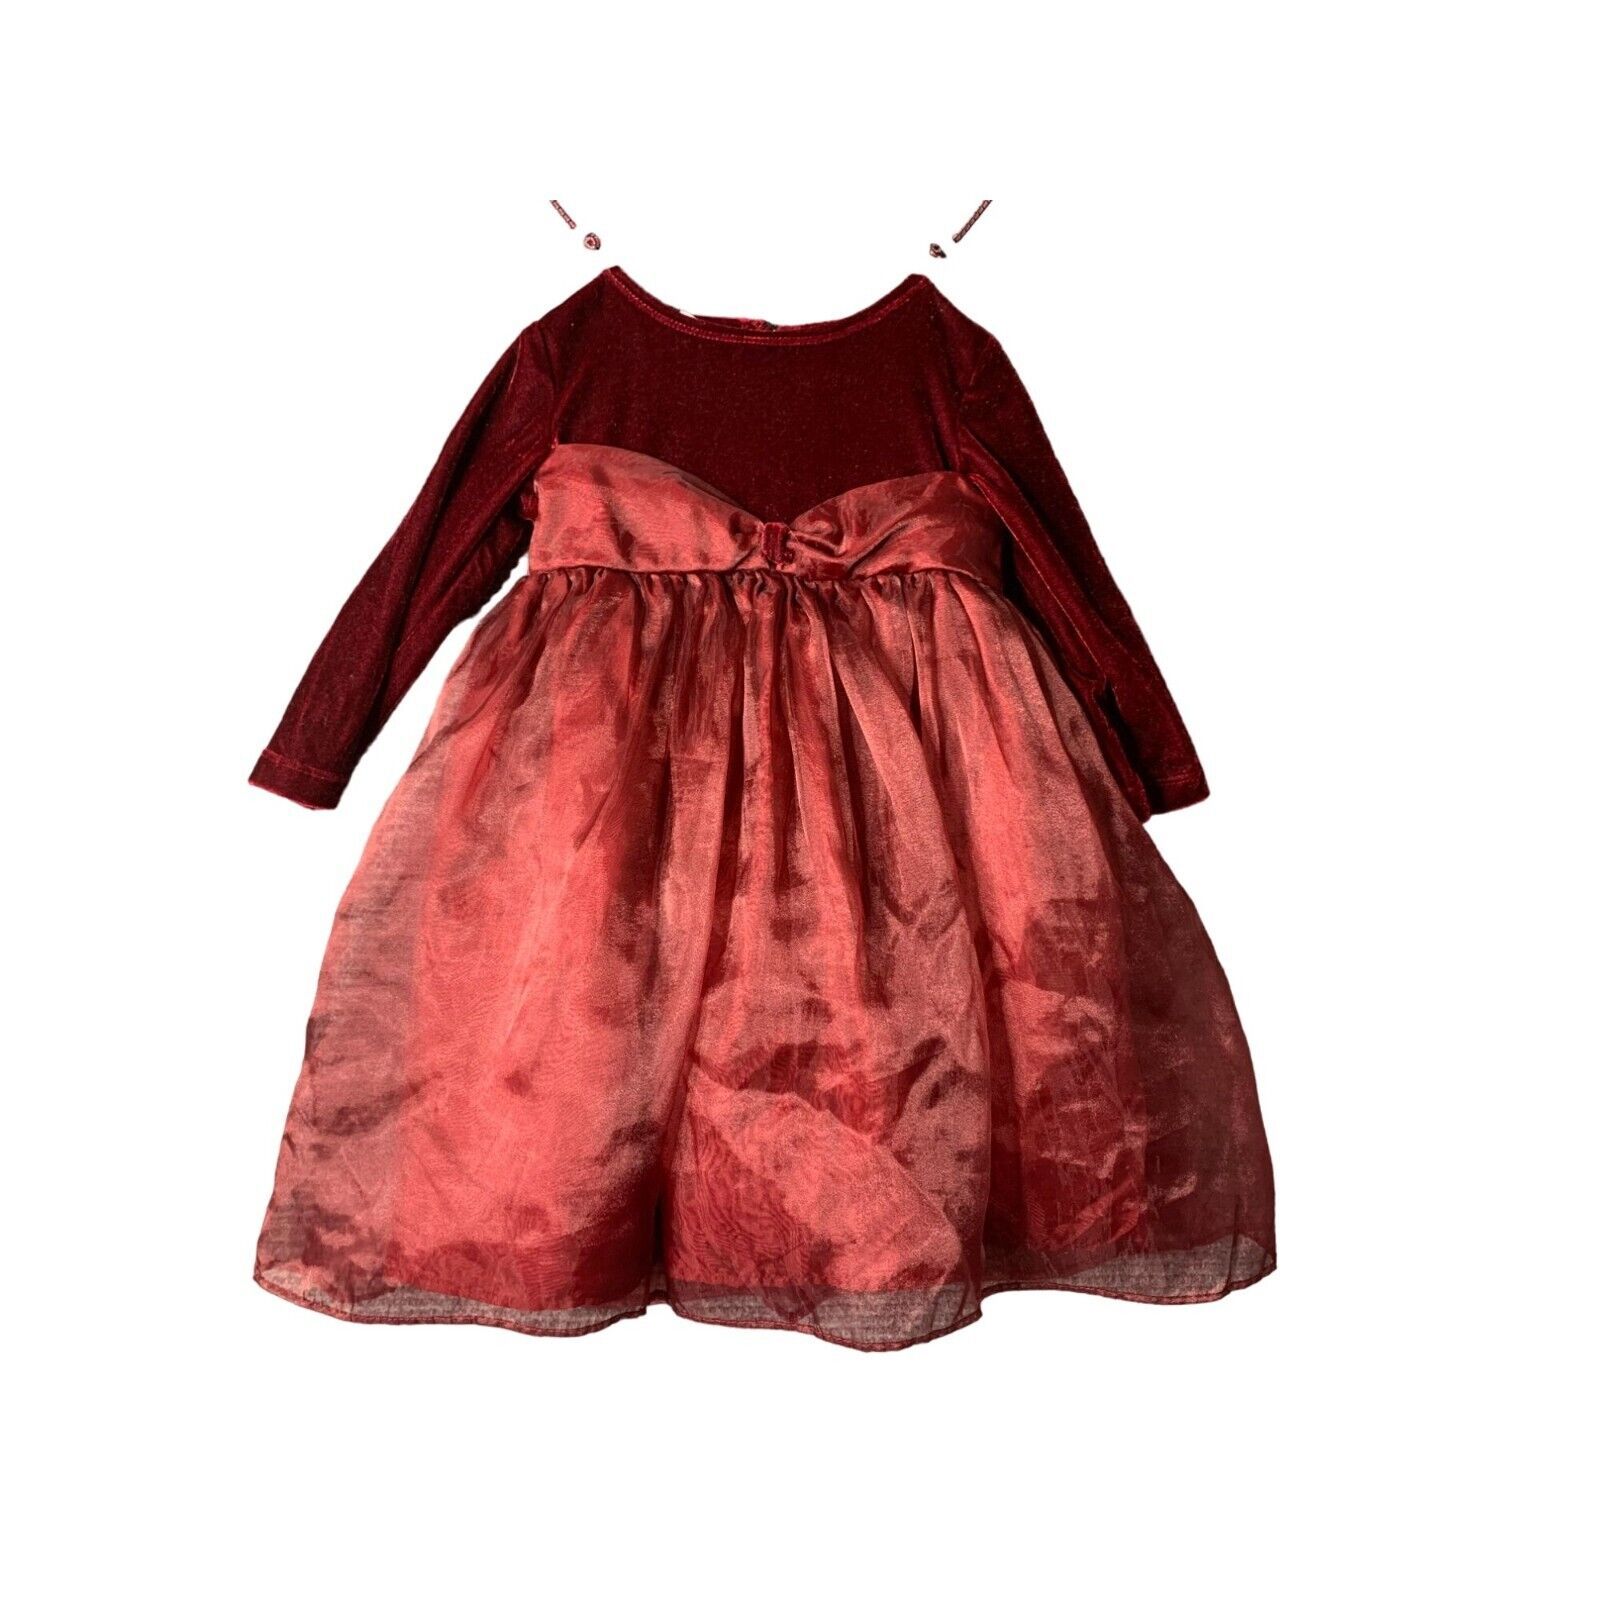 Primary image for Perfectly Dressed Girls Infant baby Size 24 Months Burgundy Velvet Top Dress She